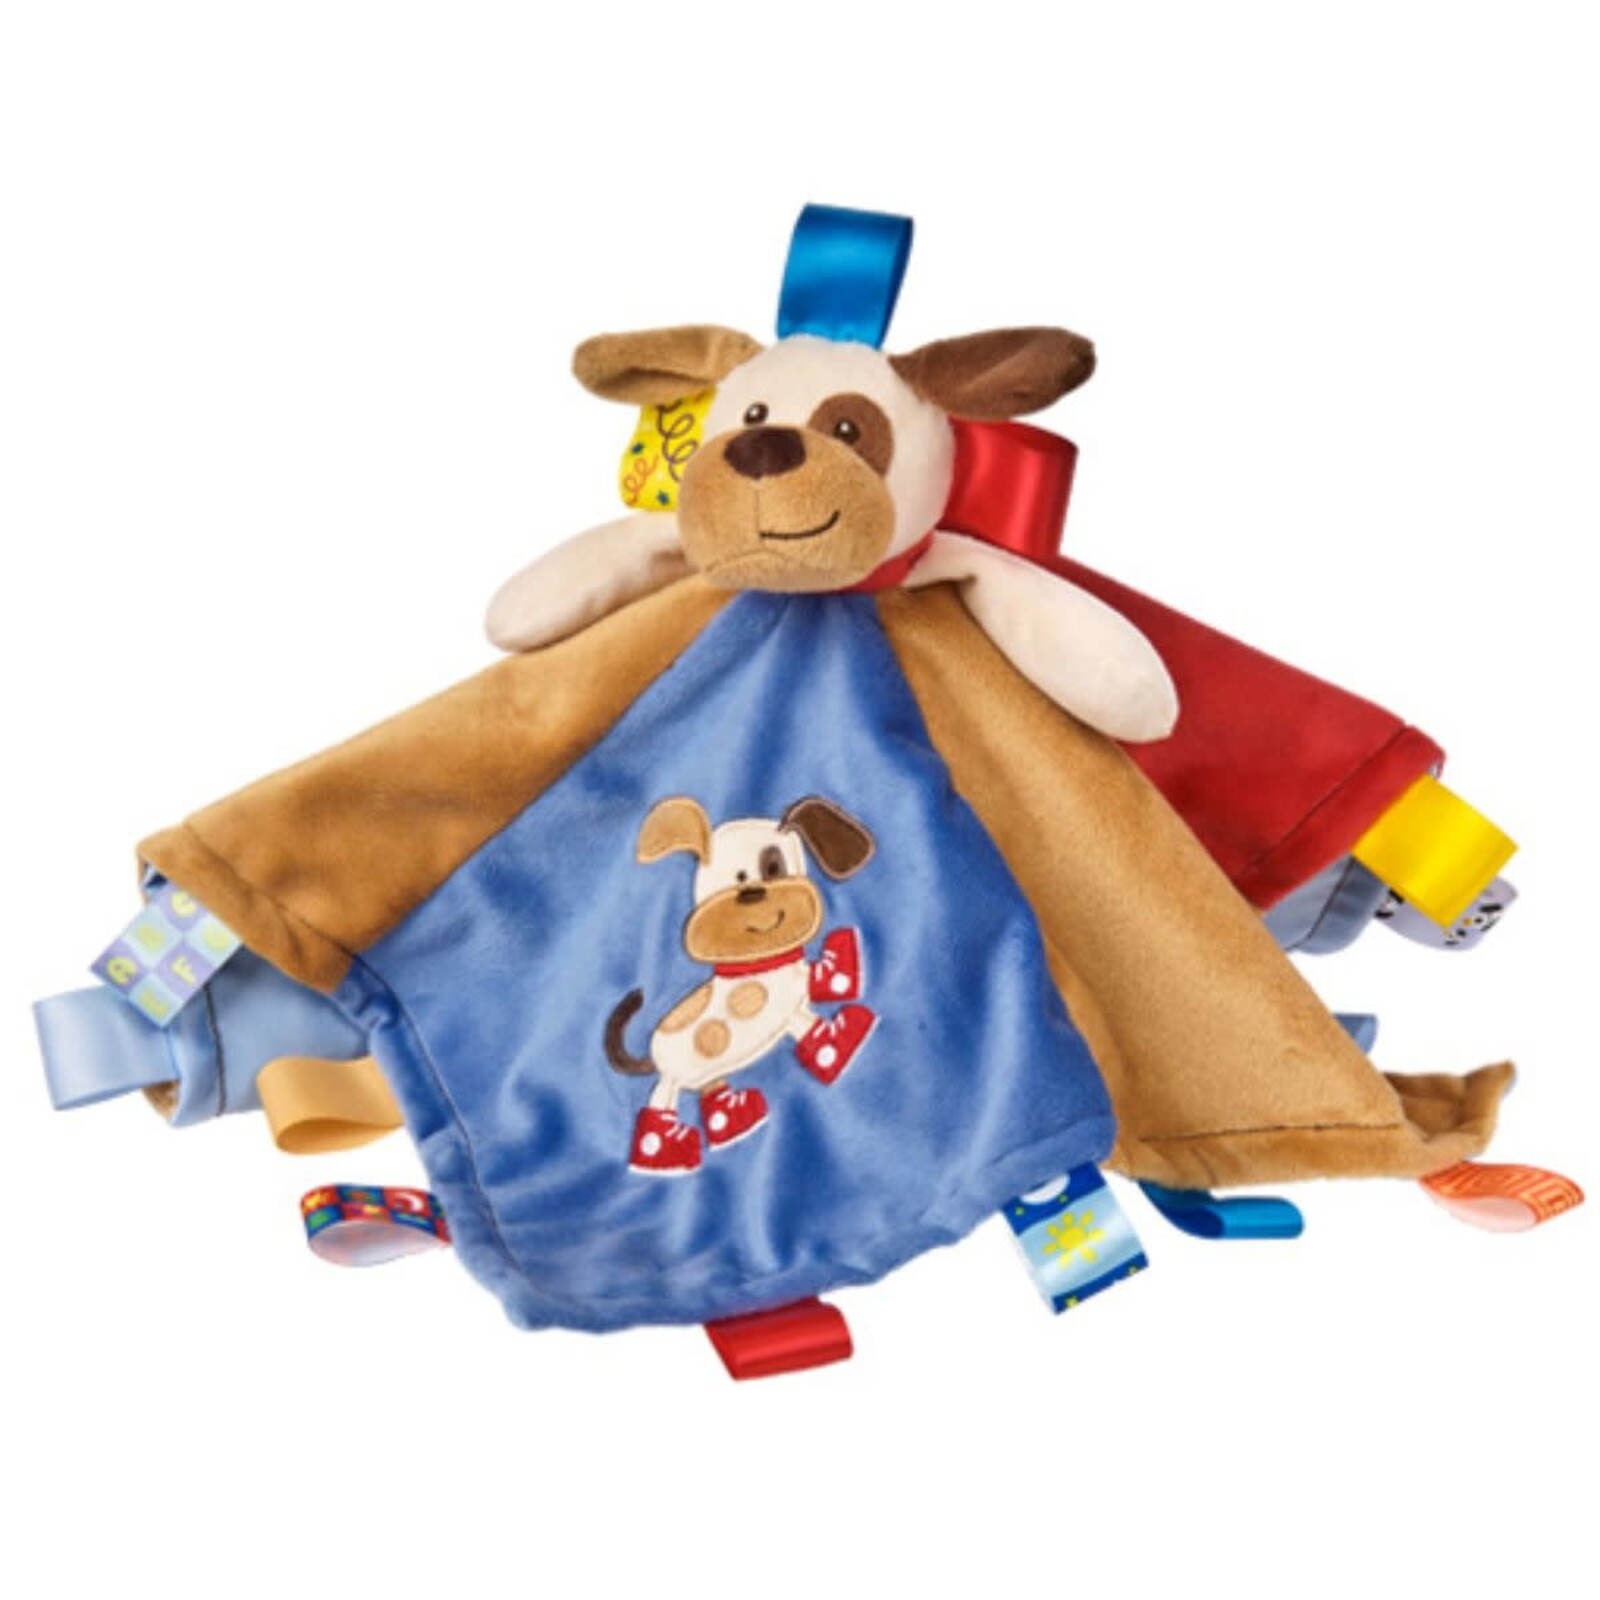 Mary Meyer Taggies Buddy Character Blanket 31745 loading=